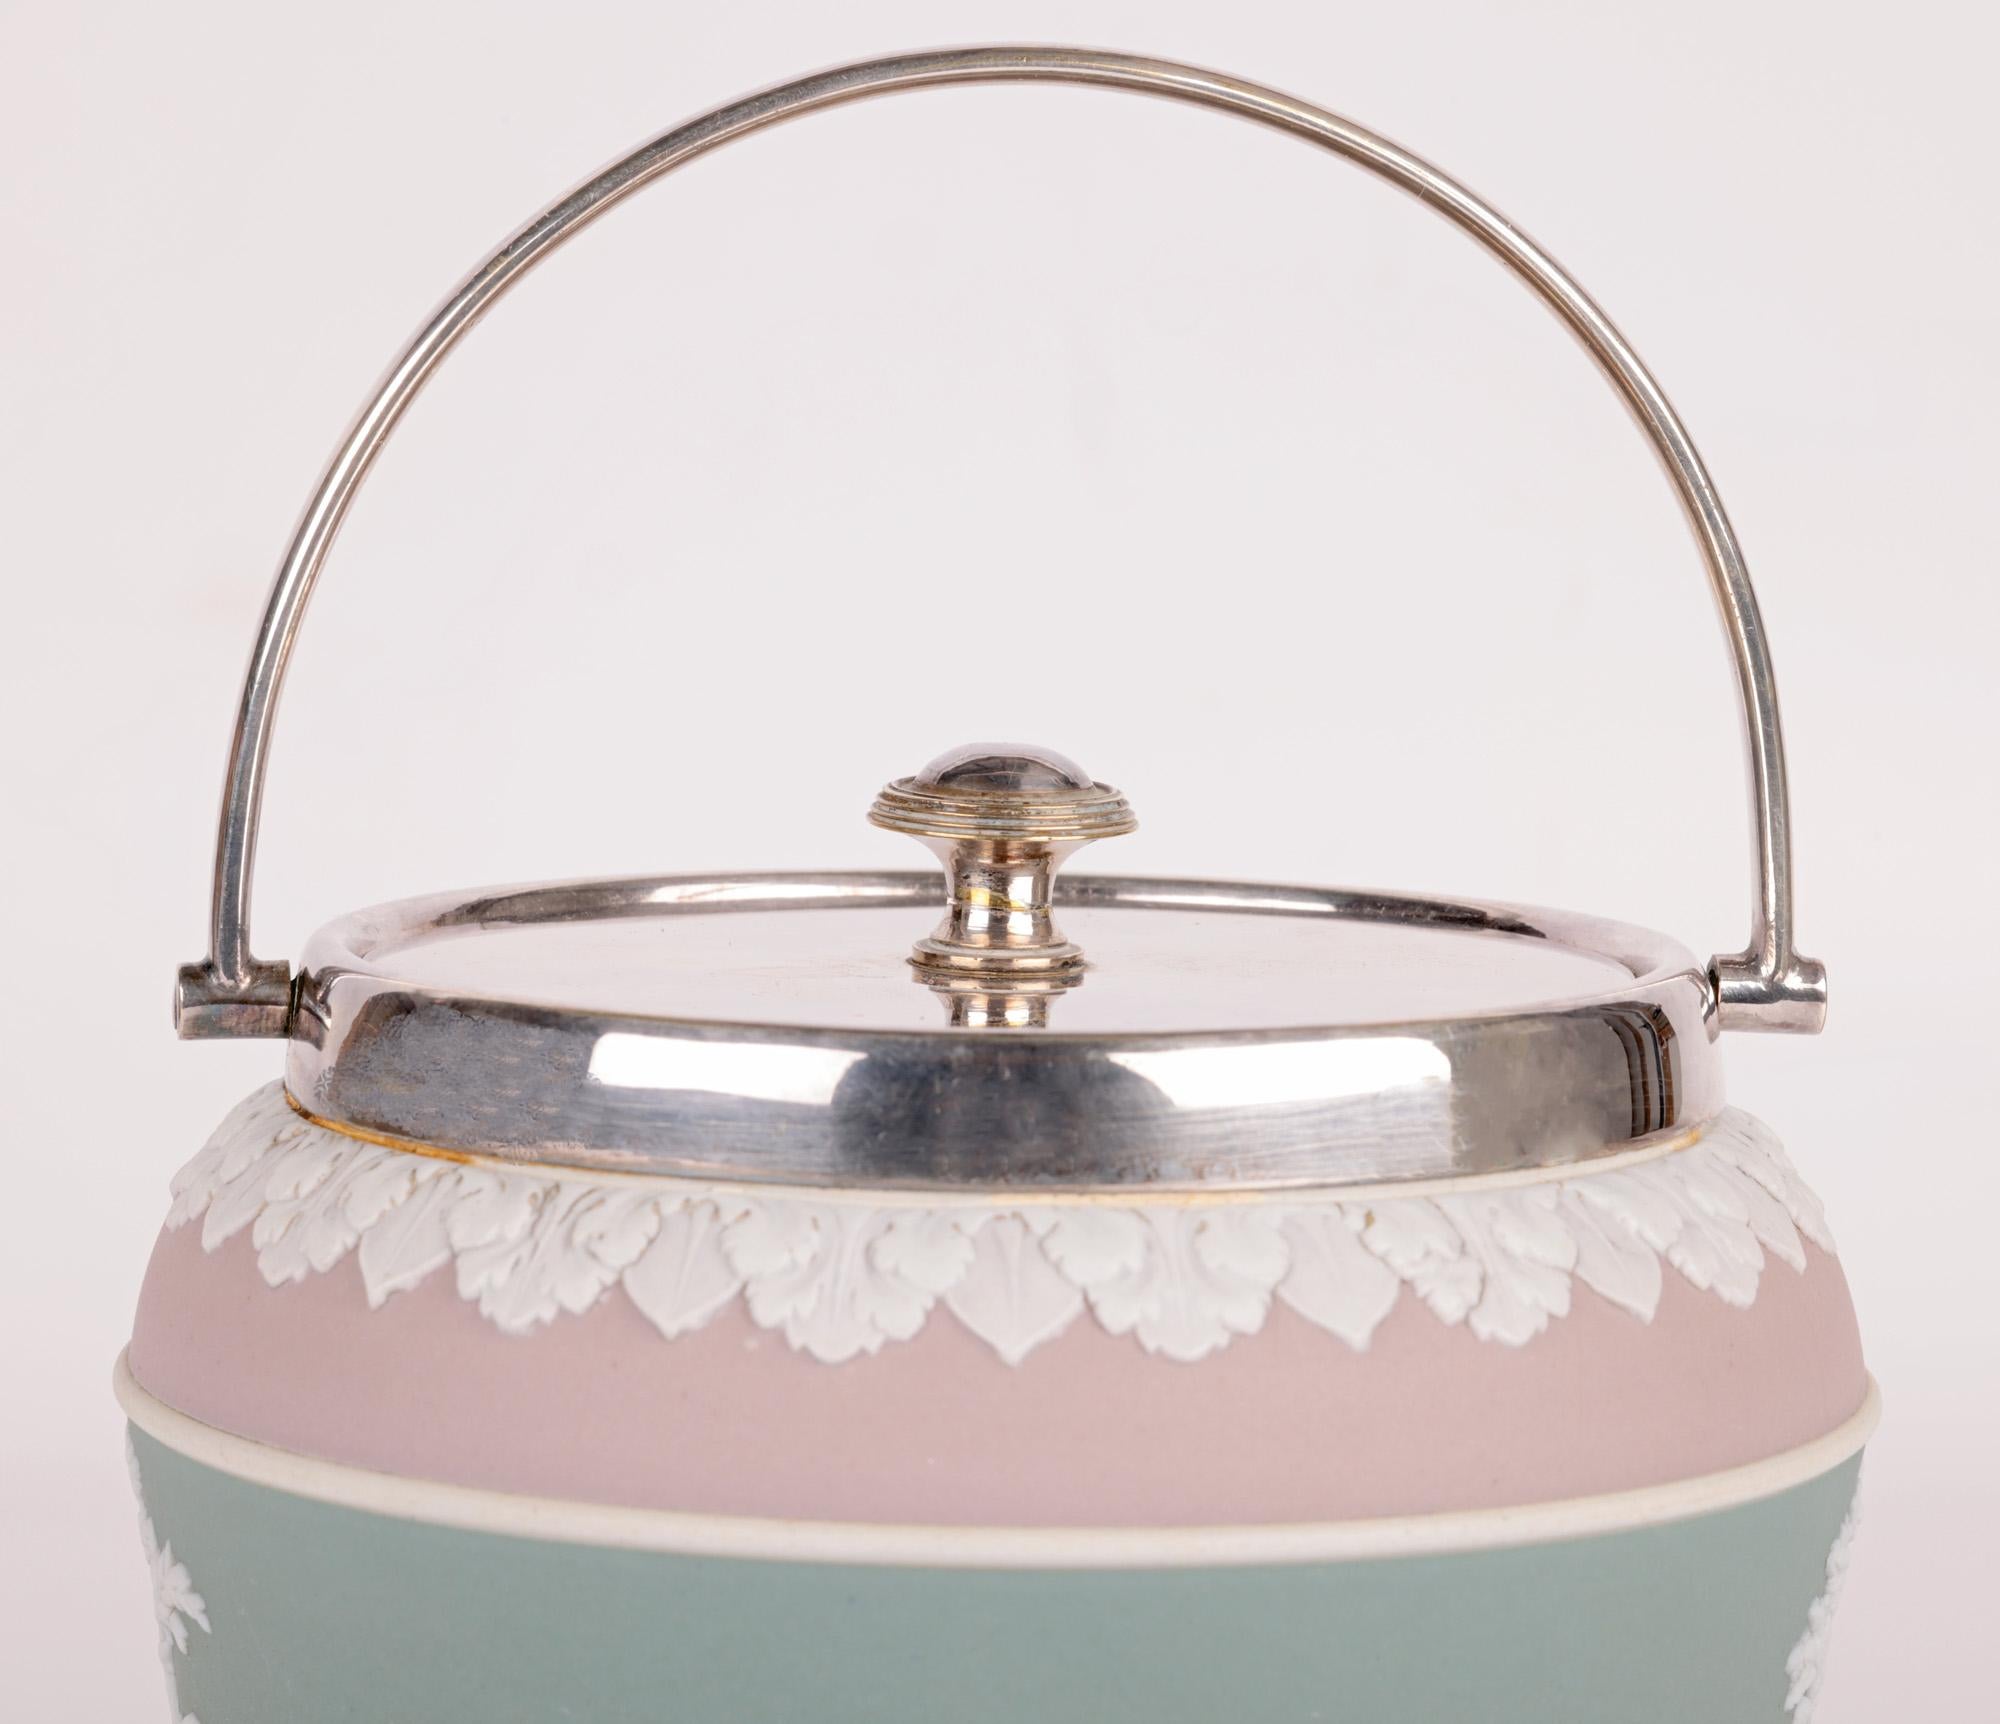 A rare and very finely made antique Wedgwood tri-color jasperware biscuit jar applied with silver plated mounts dating from the 19th century. The stoneware jar stands raised on a narrow round foot and is of wide rounded shaped with a concave central